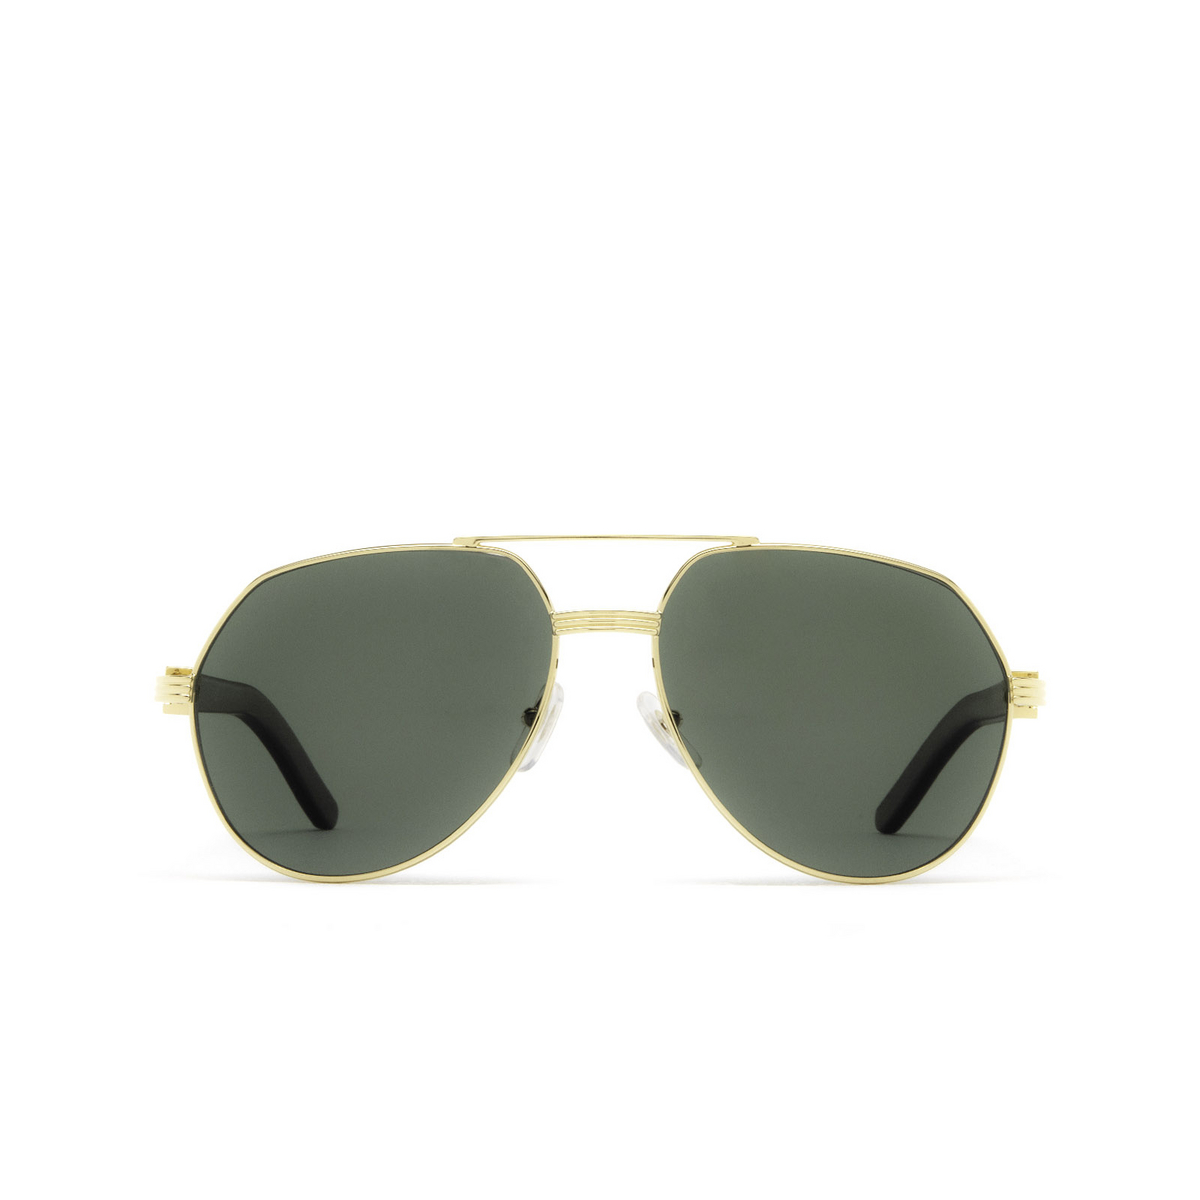 Cartier® Aviator Sunglasses: CT0272S color Gold 002 - front view.